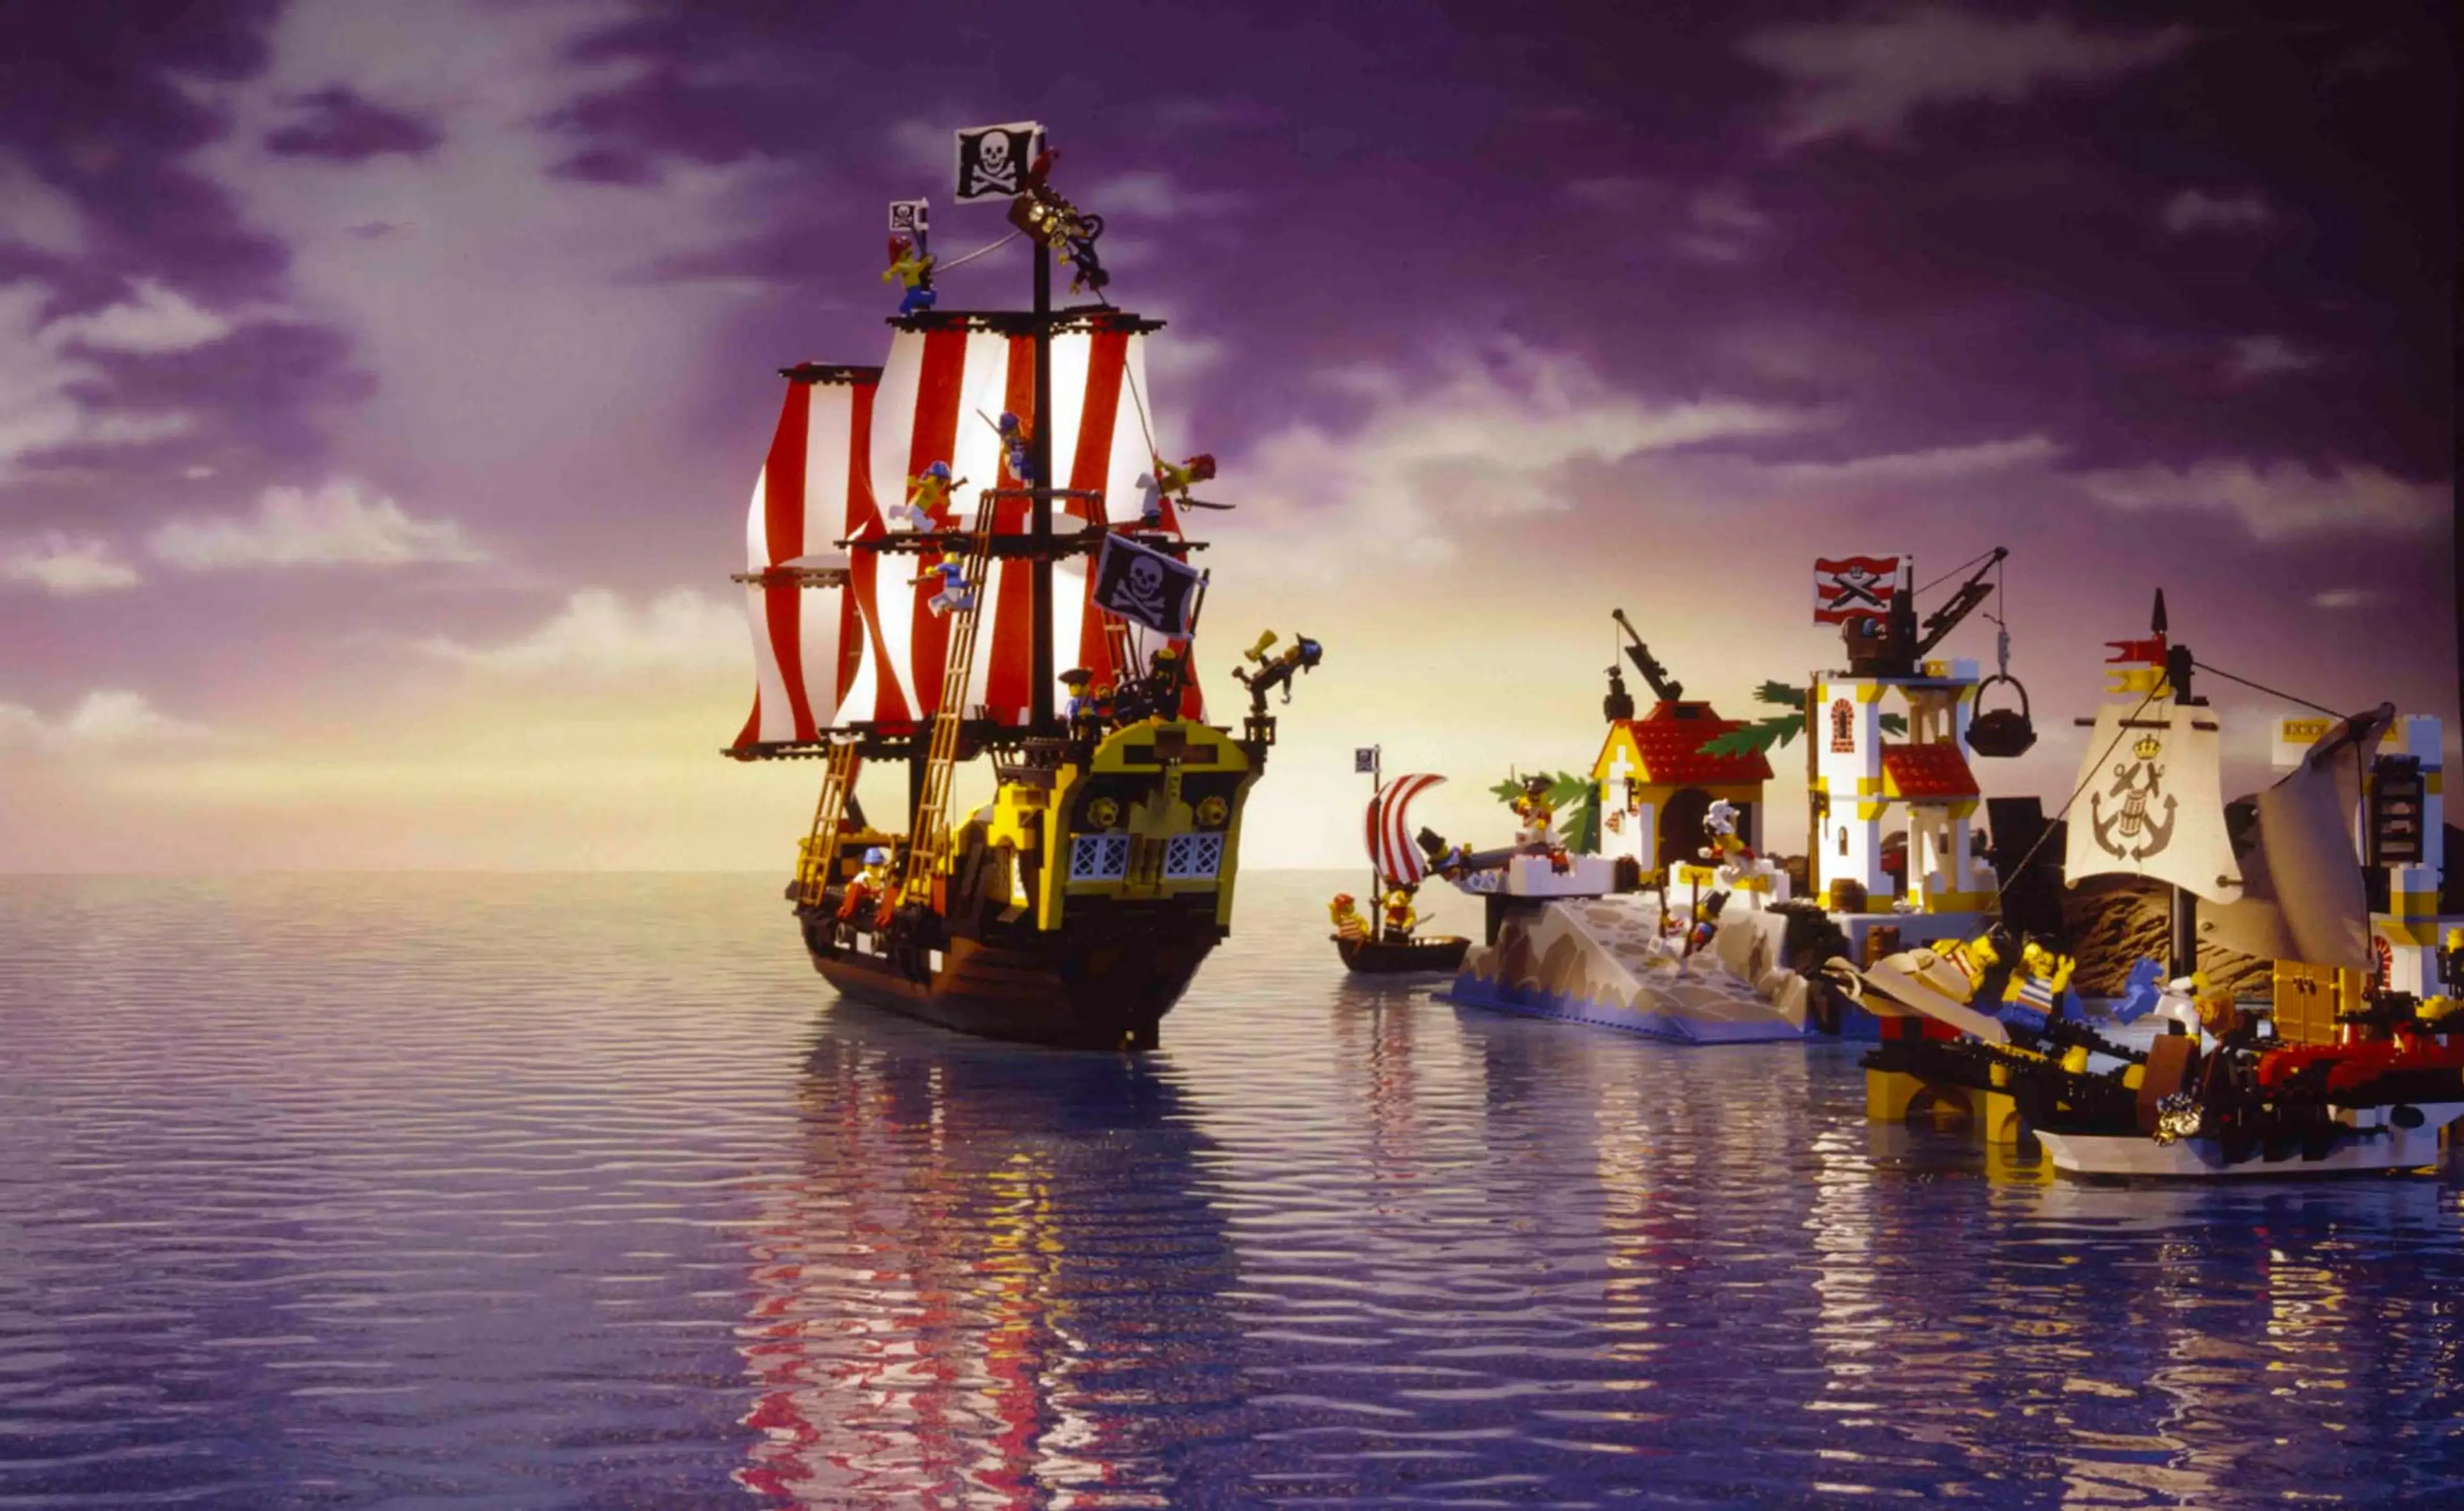 LEGO Pirates environment used in a LEGO brochure